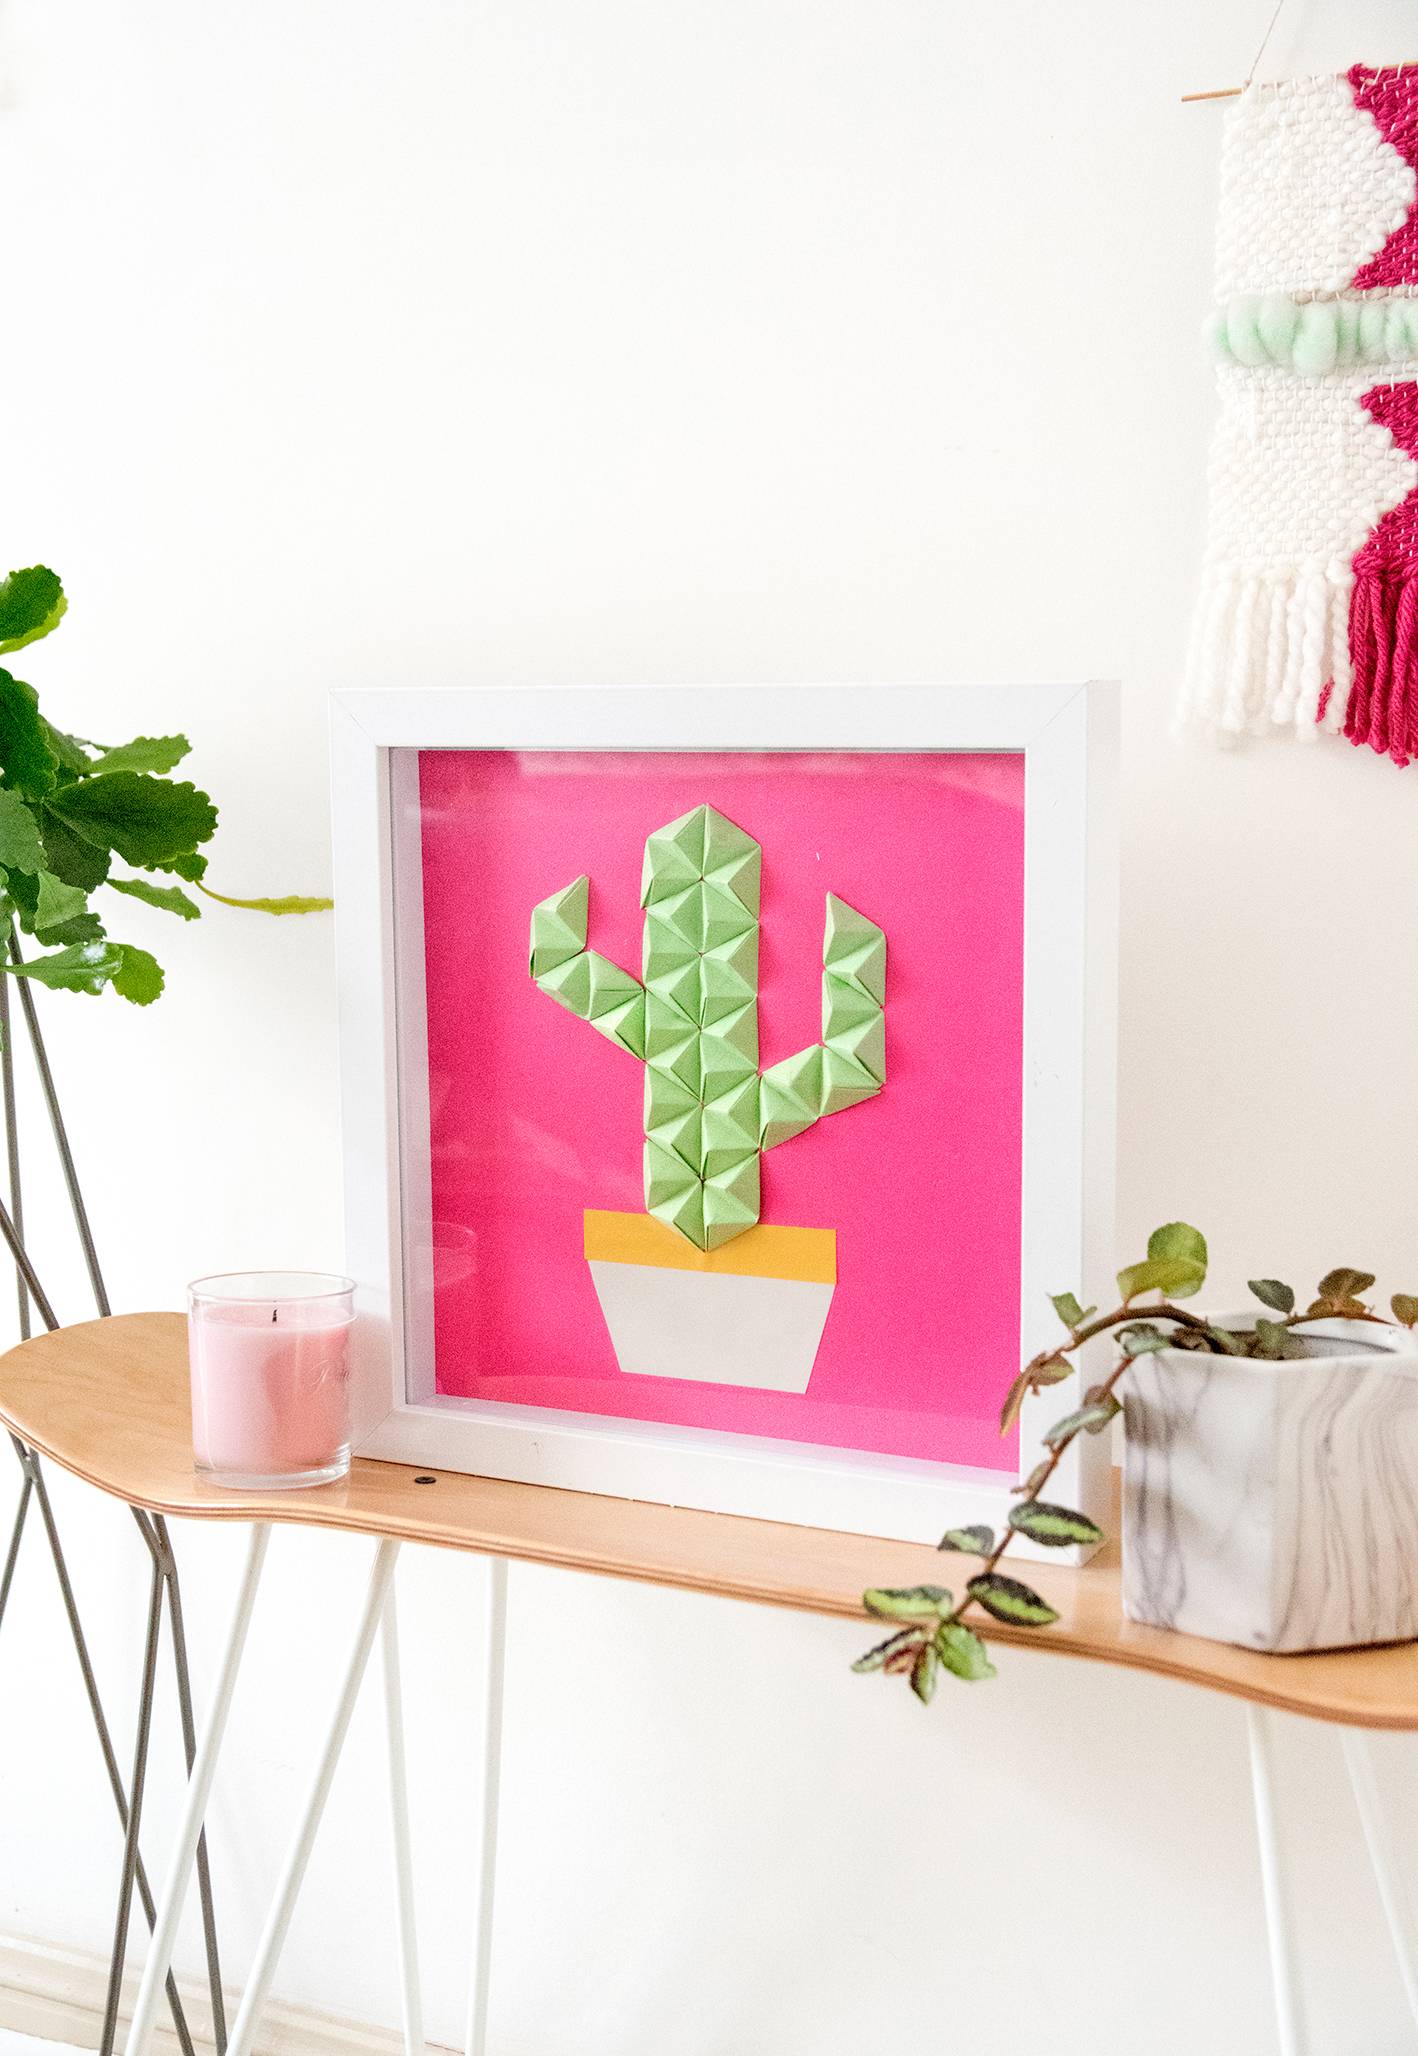 Make this: Easy DIY origami wall art in under half an hour!